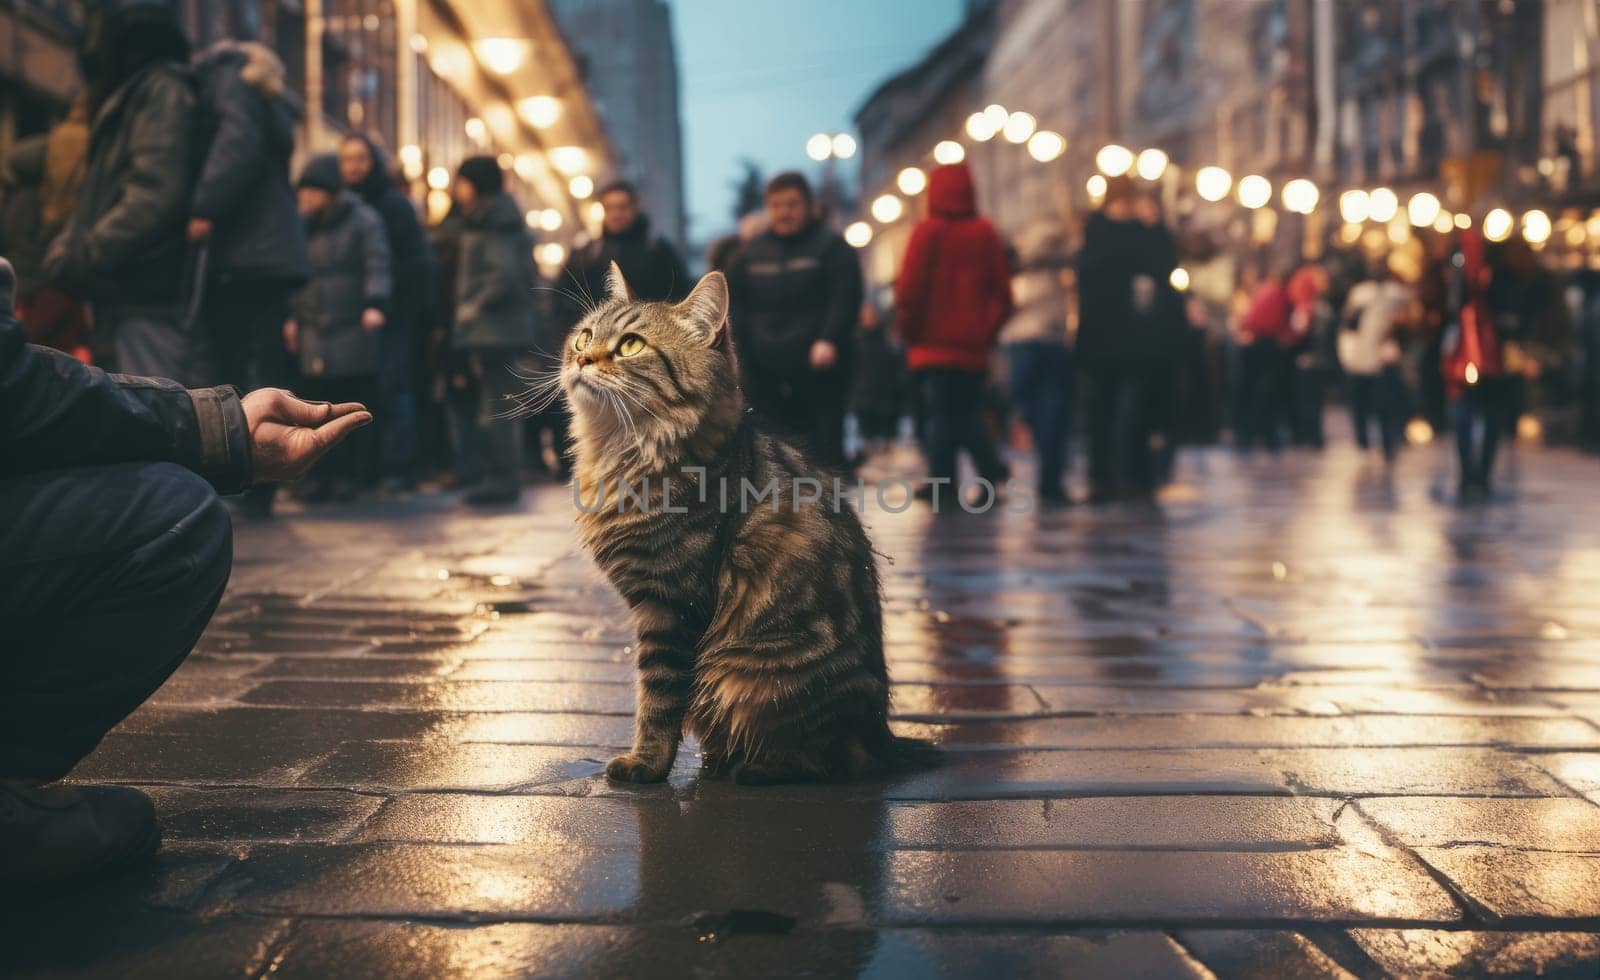 A kind stranger feeds a stray cat on a cold, rainy night.Generated image by dotshock